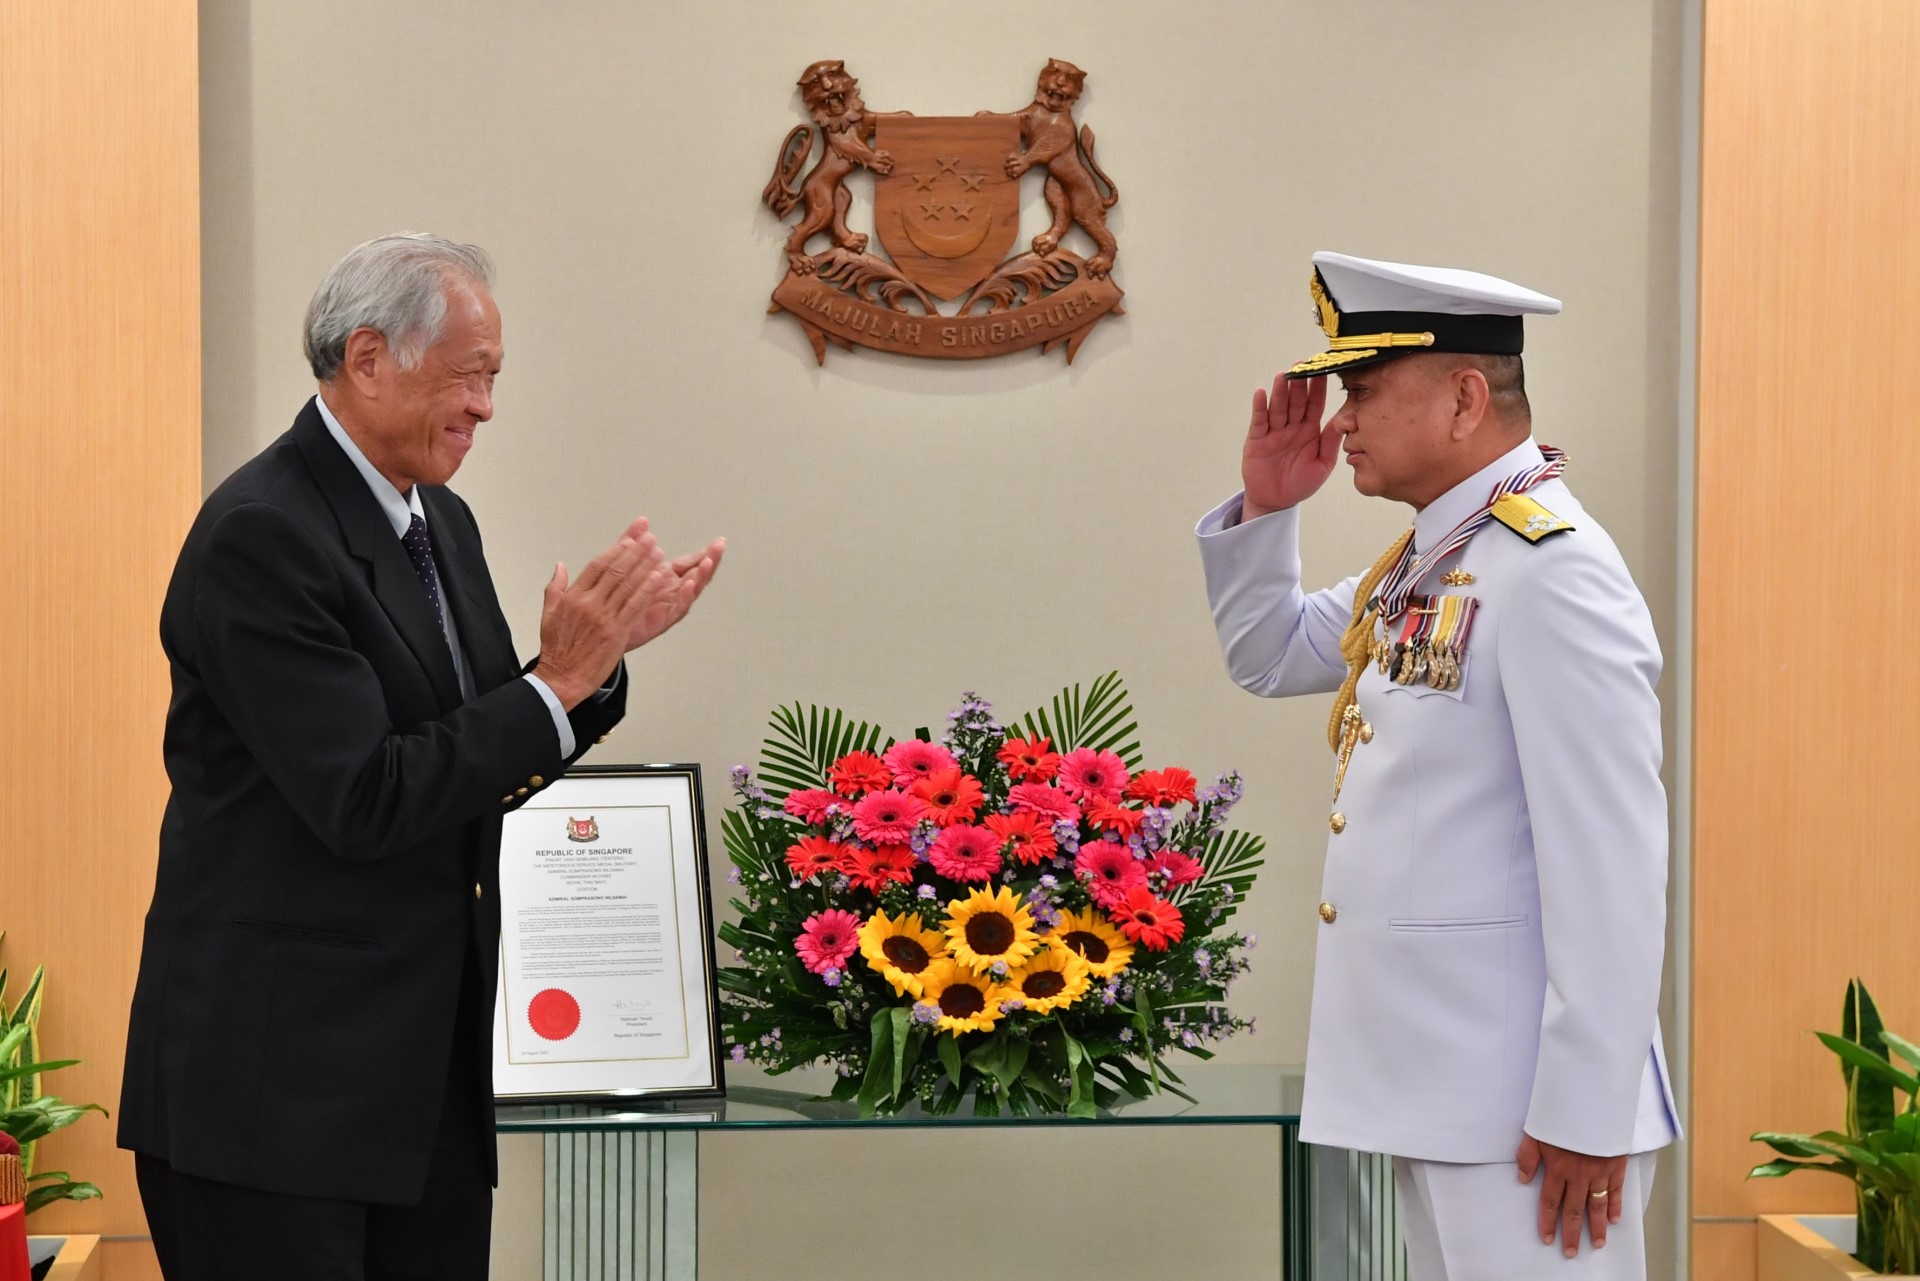 Commander-in-Chief of the Royal Thai Navy Admiral (ADM) Somprasong Nilsamai was presented the Meritorious Service Medal (Military) by Minister for Defence Dr Ng Eng Hen at the Ministry of Defence (MINDEF) this morning.